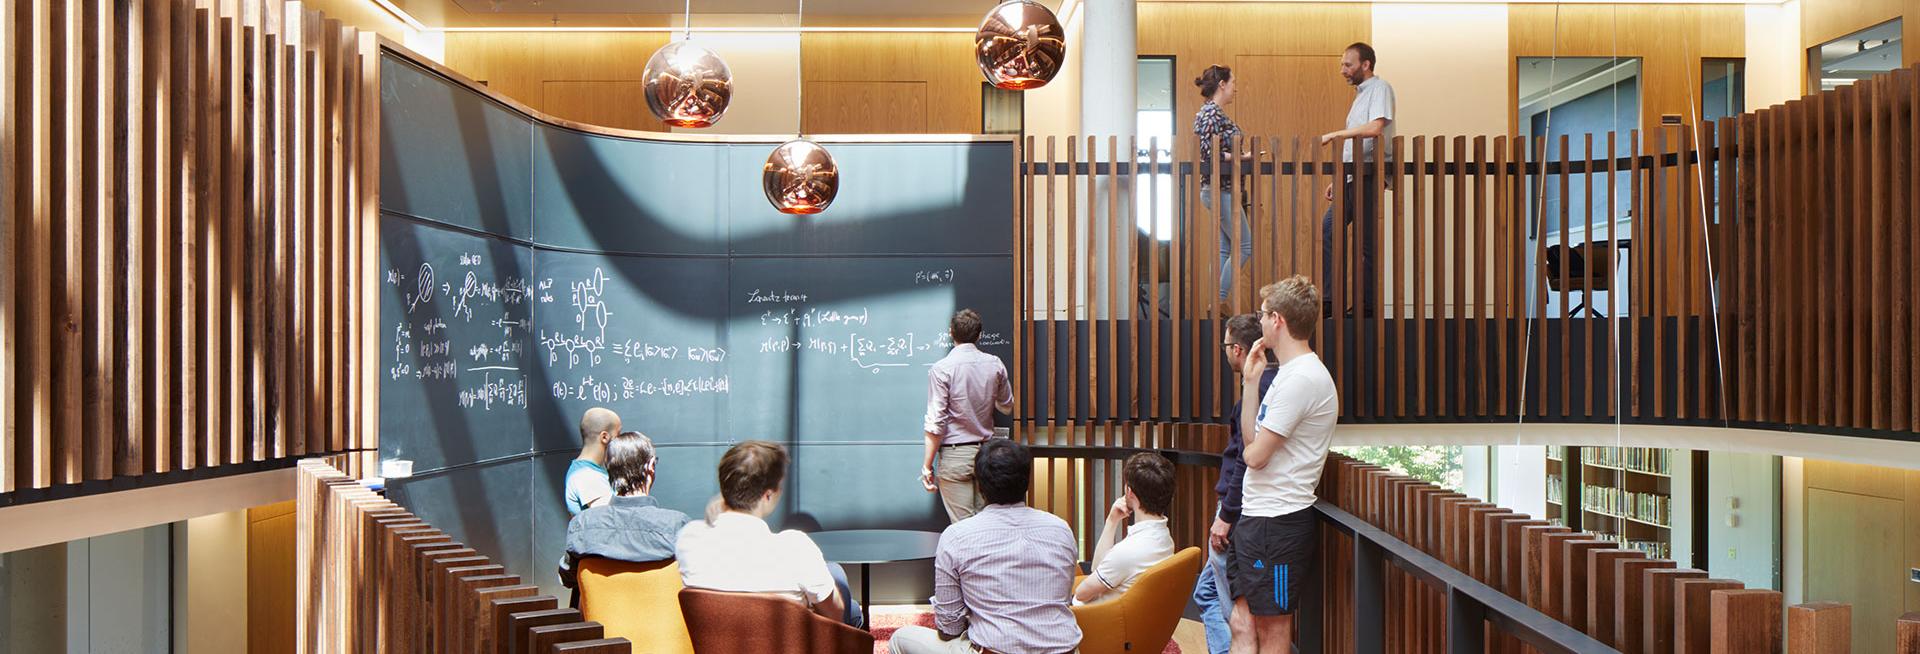 A group of researchers talking through a problem on a blackboard in the Beecroft building, Department of Physics